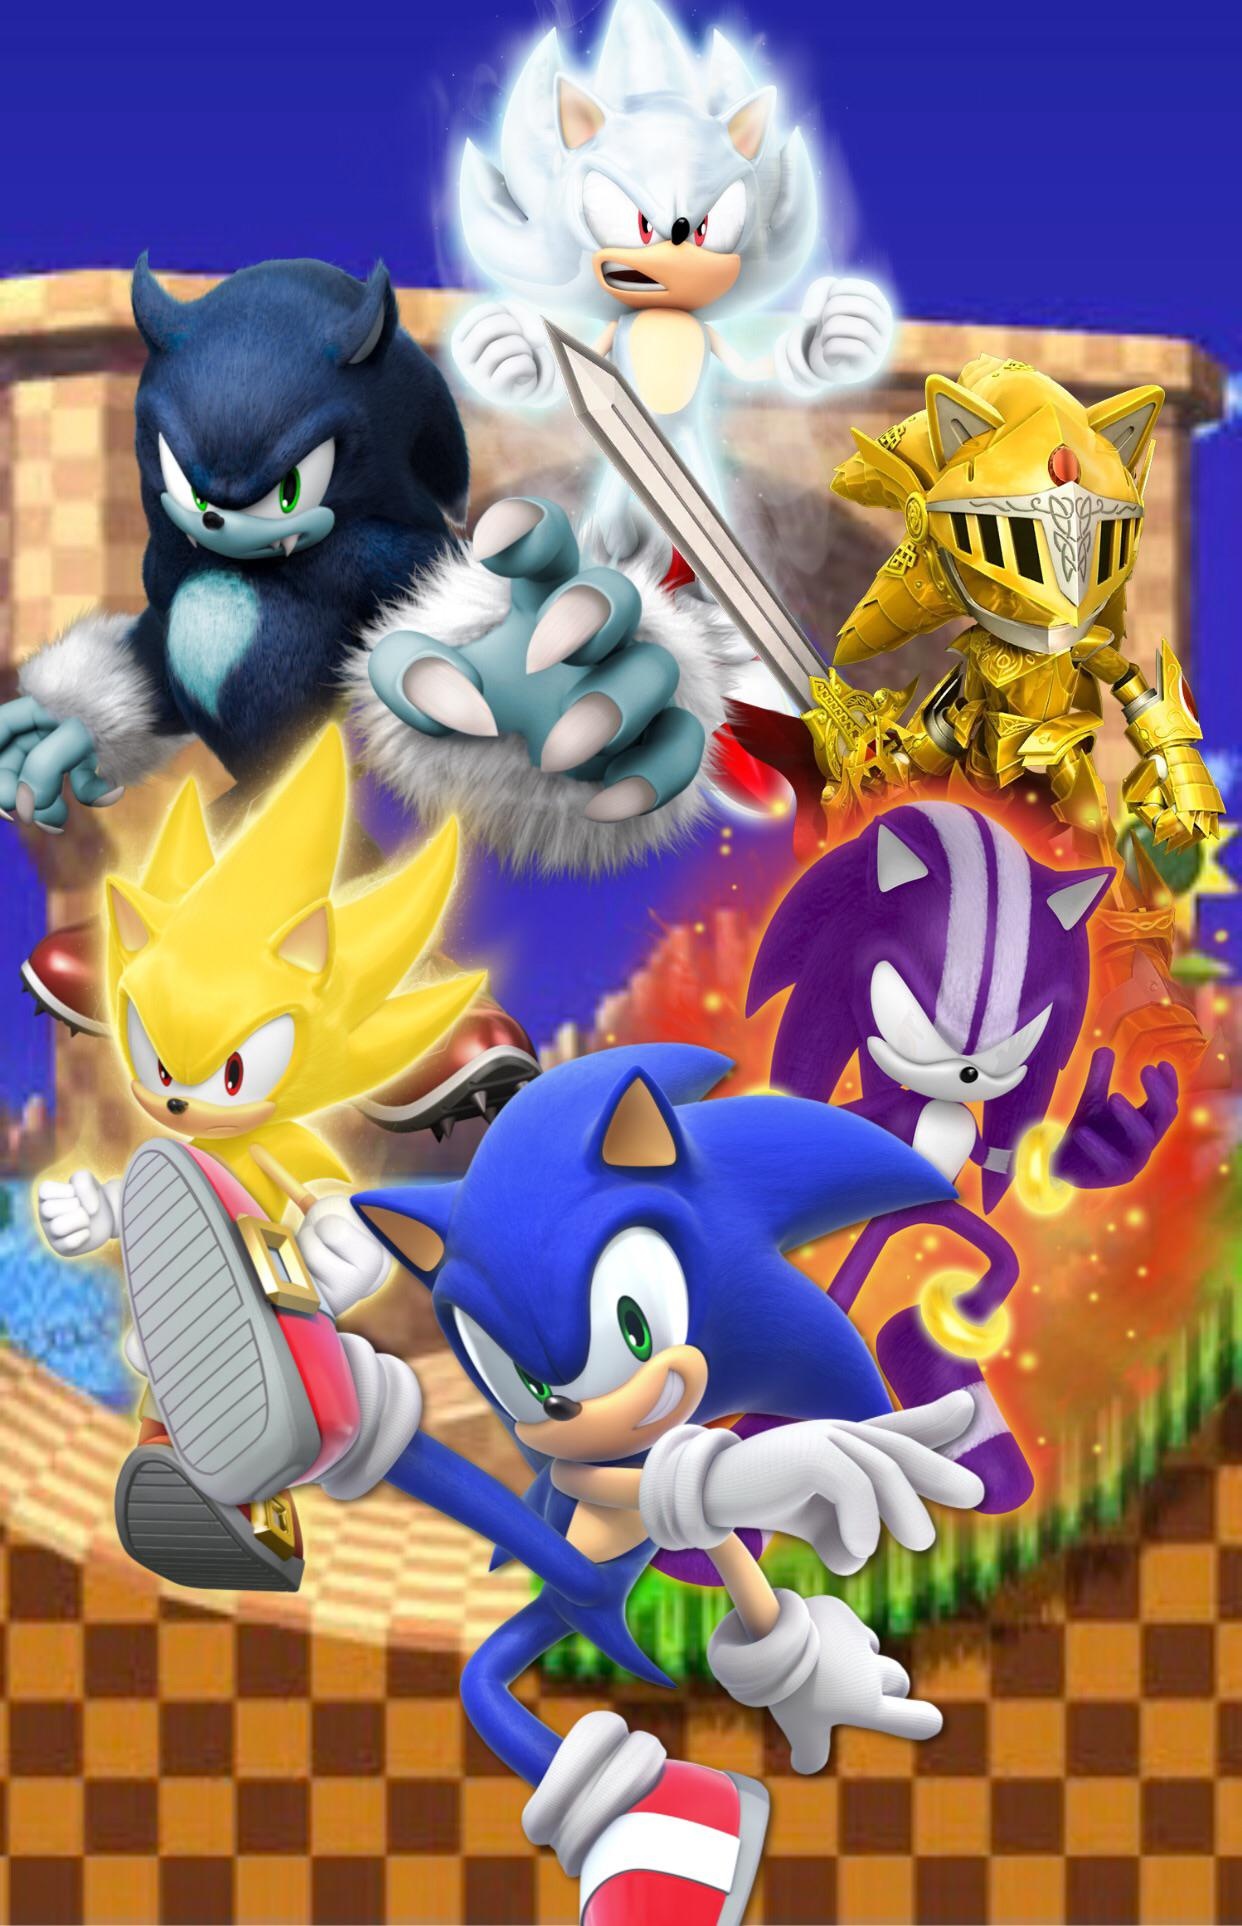 Hyper Sonic, Sonic with Super Sonic wallpapers, Sonic's ultimate power, Sonic's transformations, 1250x1930 HD Phone